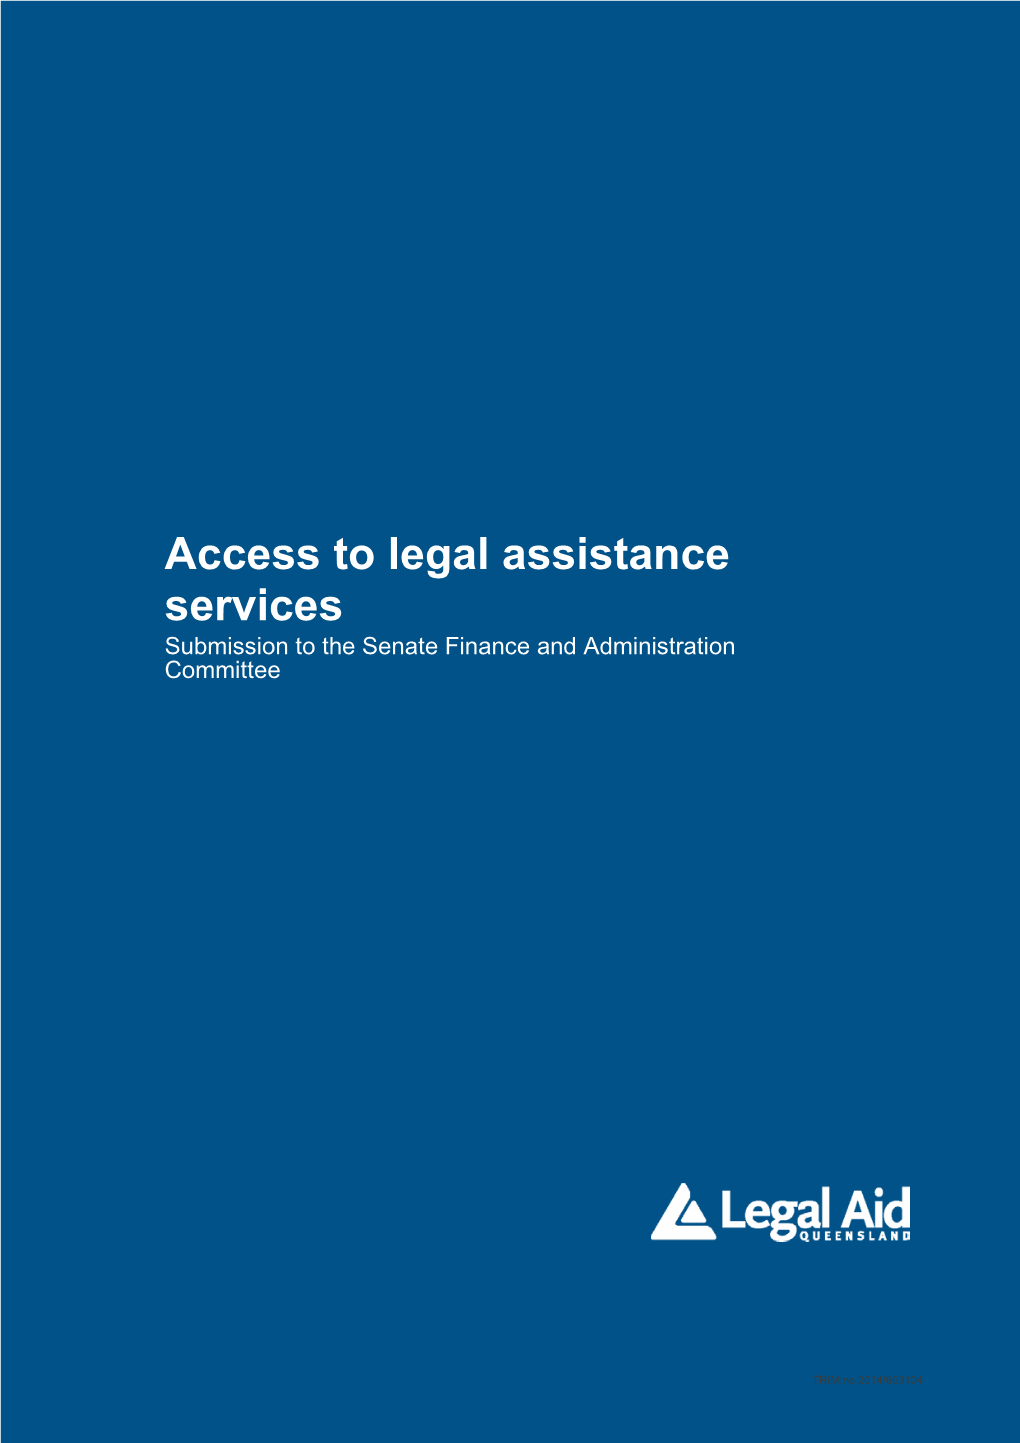 Access to Legal Assistance Services Submission to the Senate Finance and Administration Committee